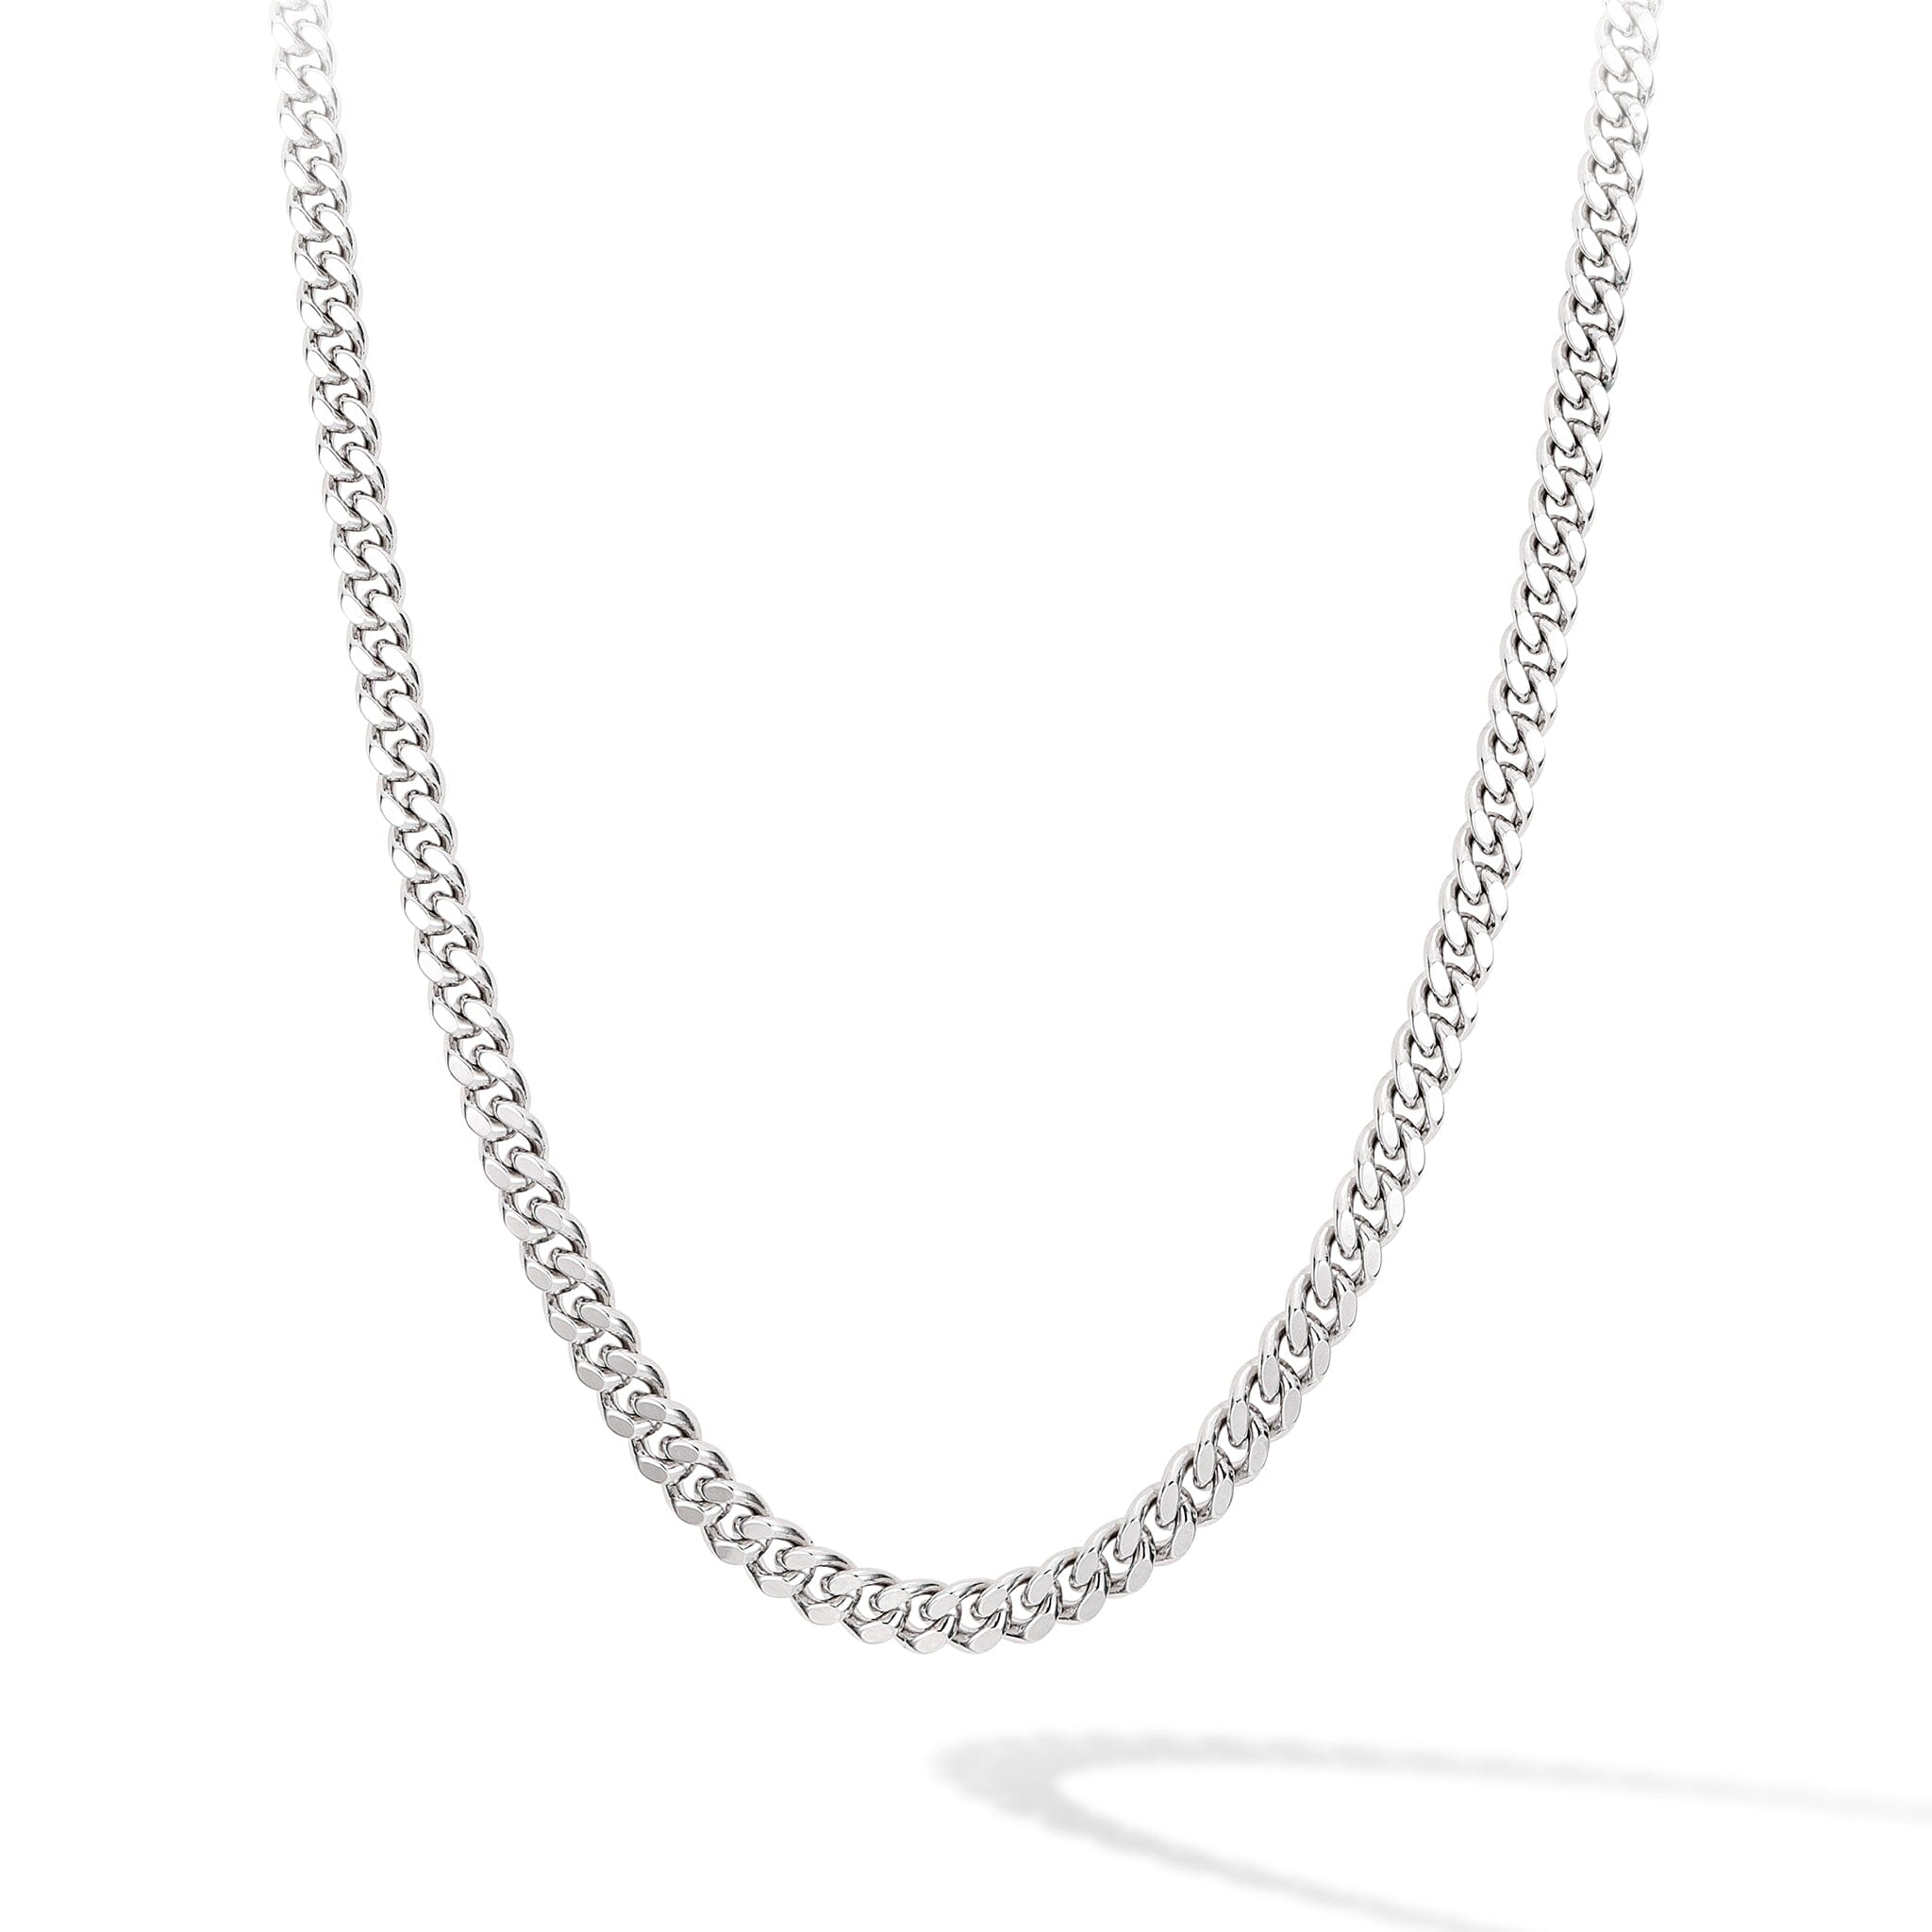 Men's Sterling Silver Curb Chain Necklace Awnl